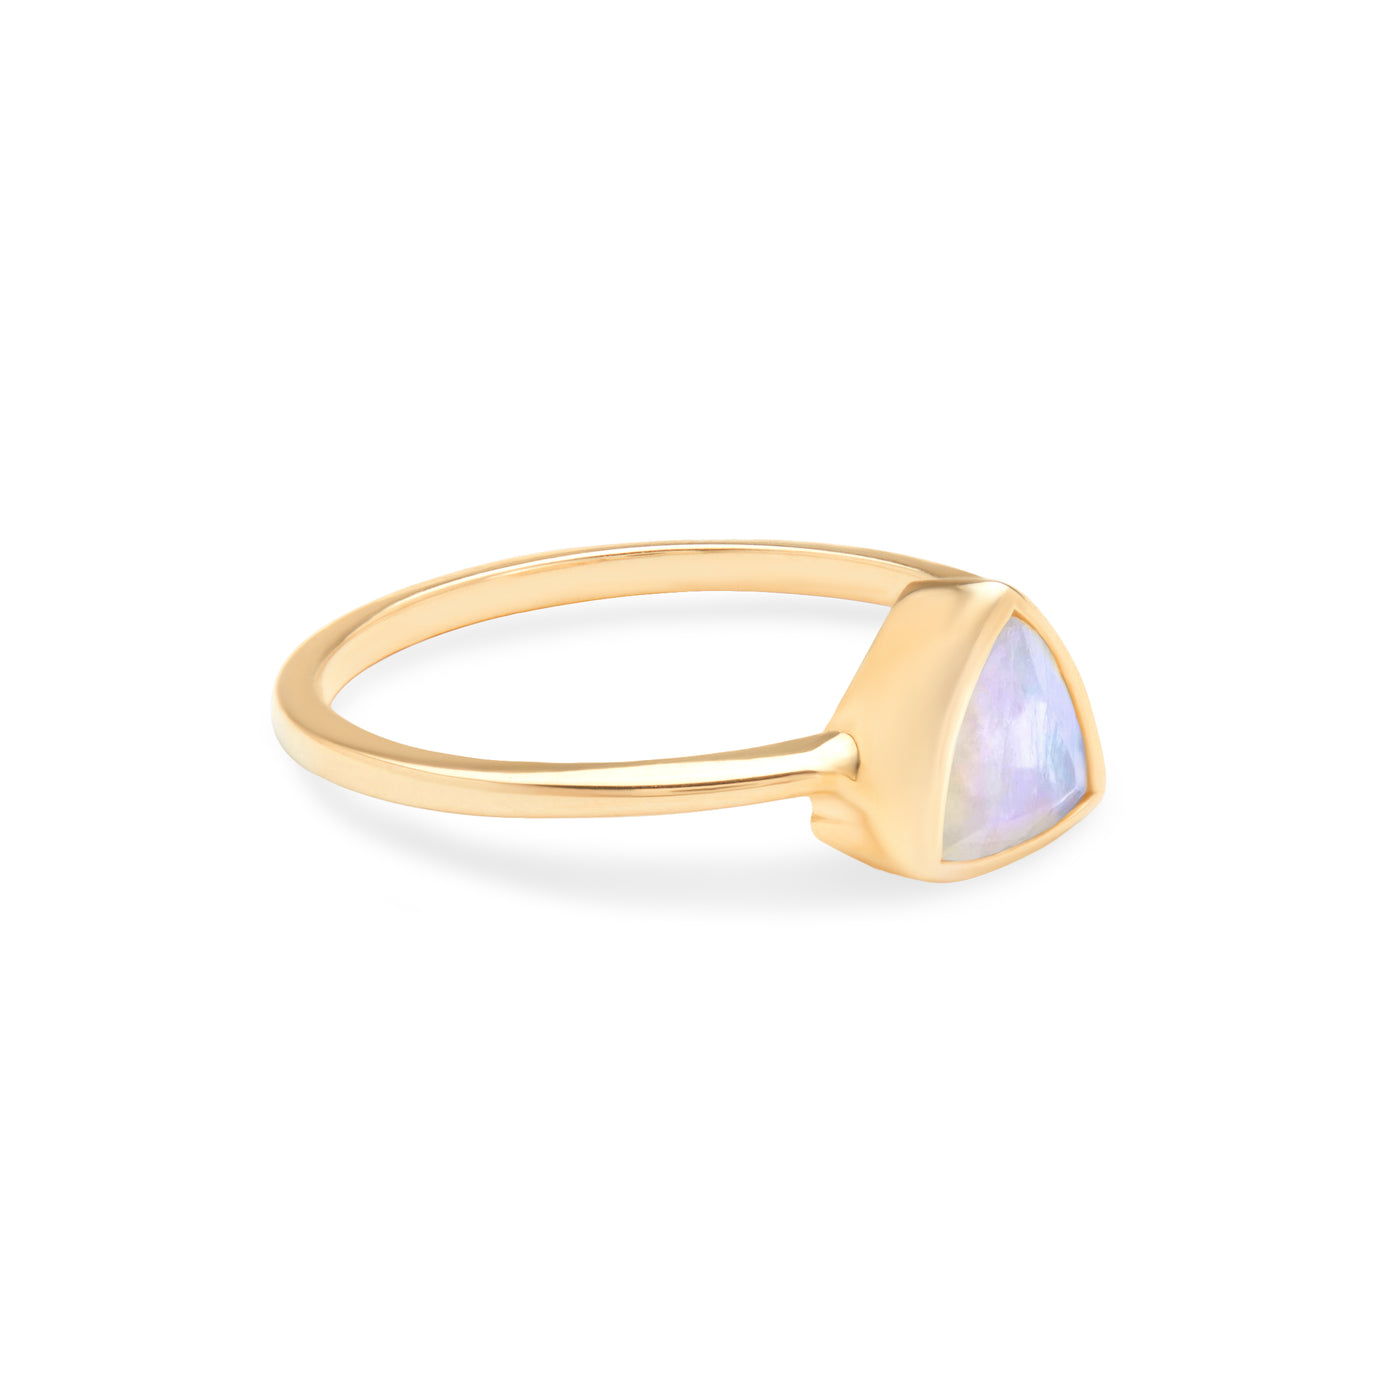 14k Yellow Gold Ring with Moonstone in Triangle Shape laying Flat on White Background Turned For Side View